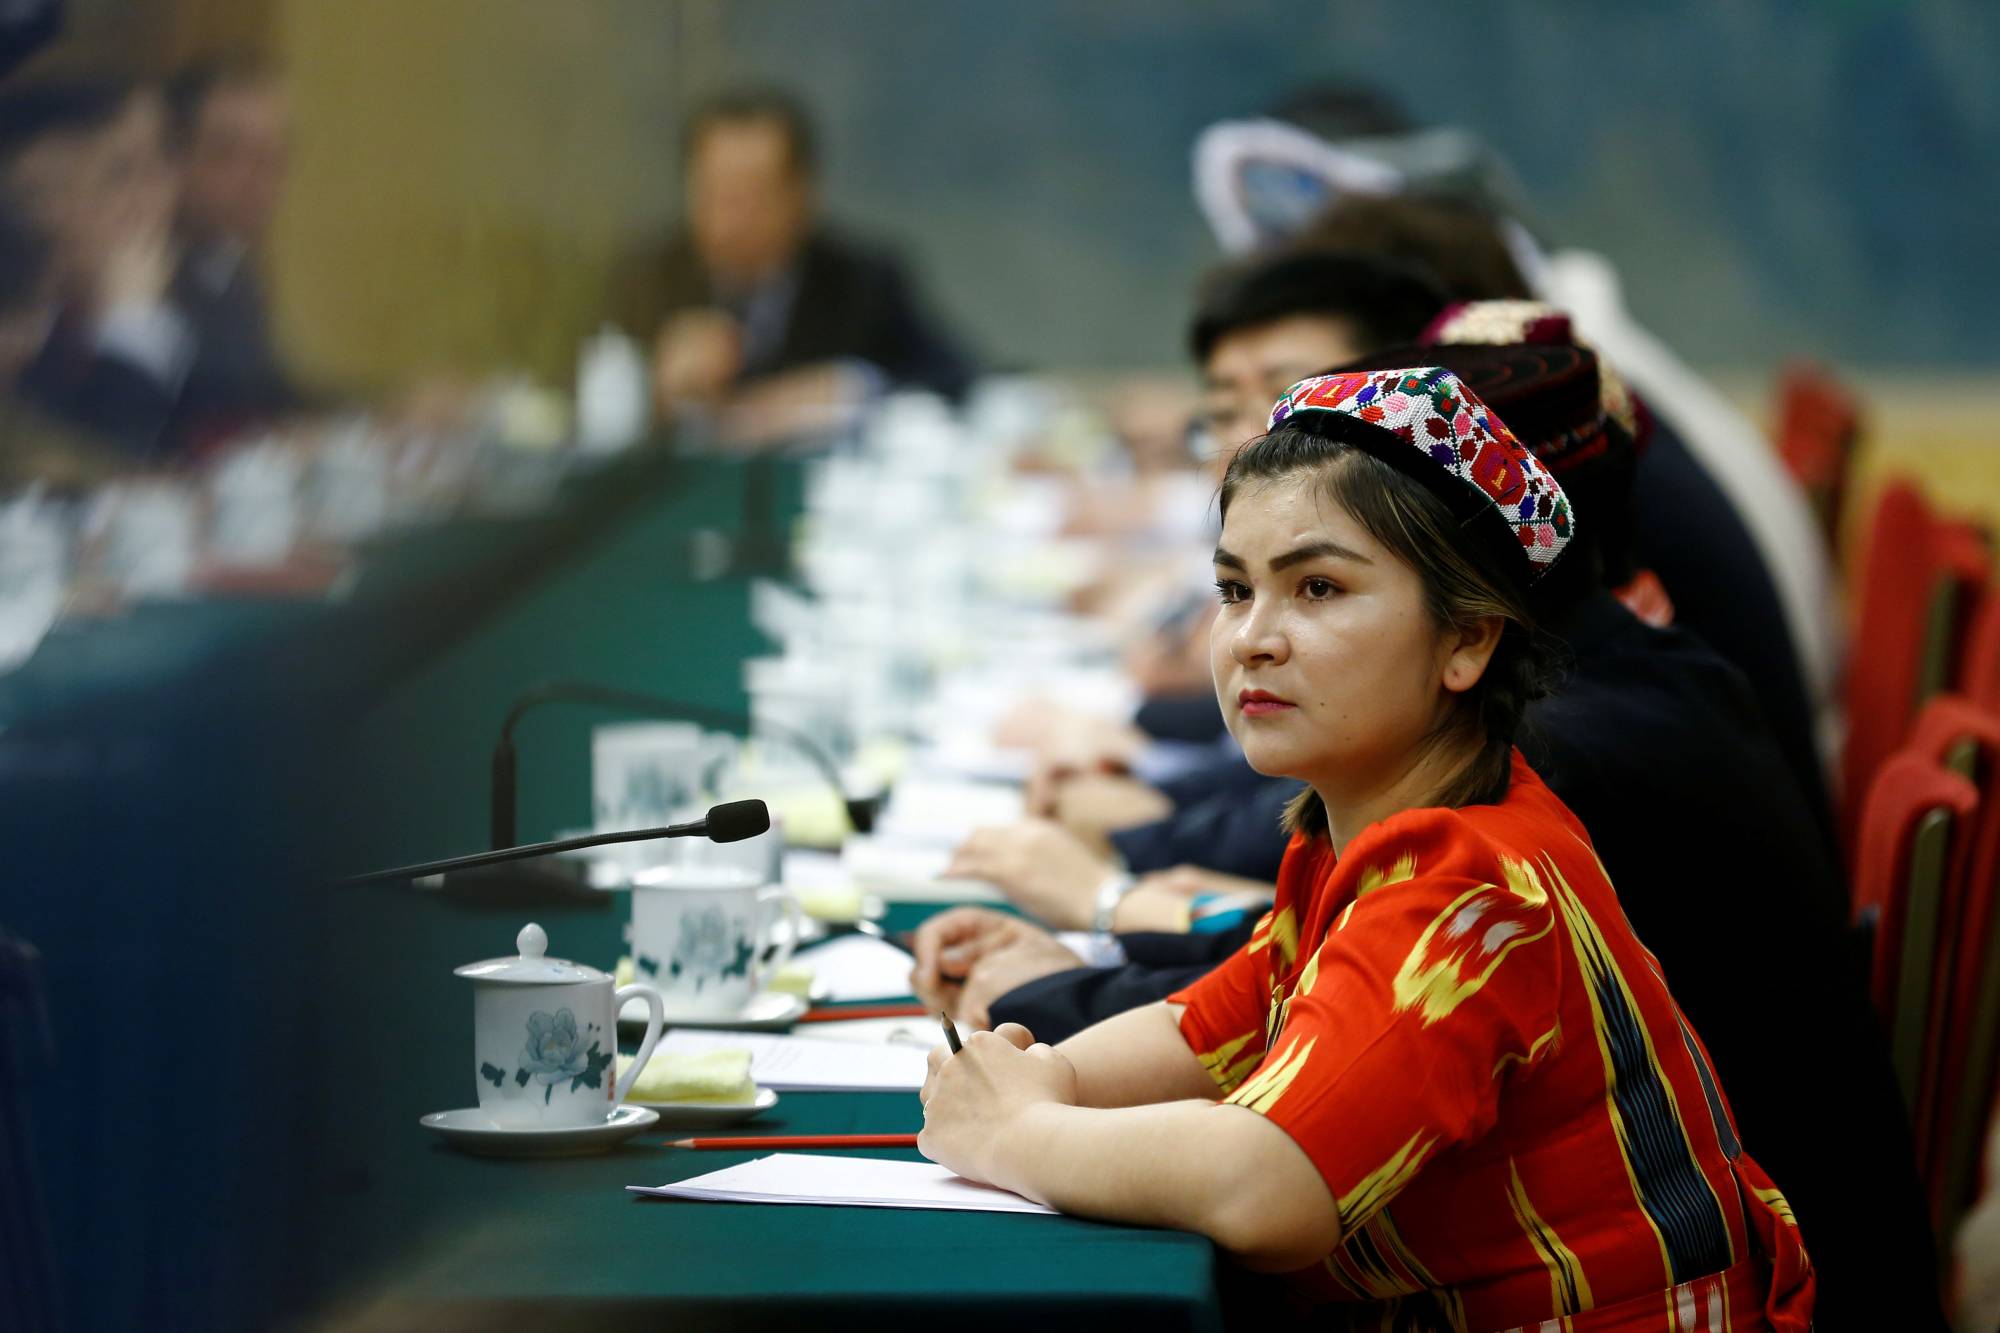 A delegate wearing traditional clothing attends a session of the Xinjiang Uyghur Autonomous Region on the sidelines of the National People's Congress at the Great Hall of the People in Beijing in 2018. | REUTERS 